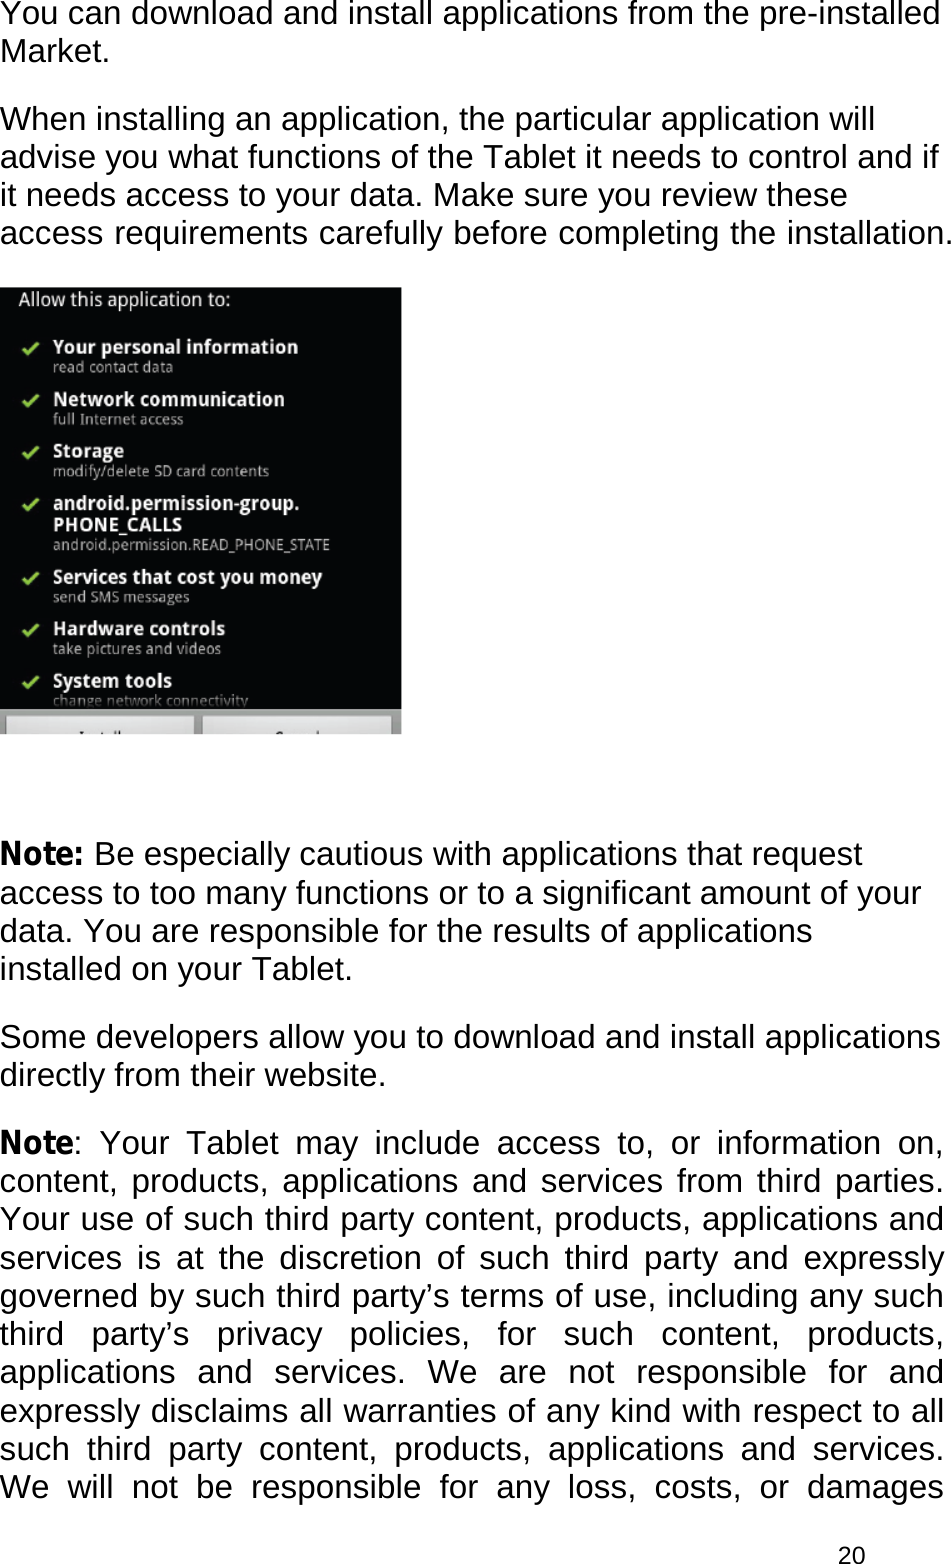  20 You can download and install applications from the pre-installed Market.  When installing an application, the particular application will advise you what functions of the Tablet it needs to control and if it needs access to your data. Make sure you review these access requirements carefully before completing the installation.    Note: Be especially cautious with applications that request access to too many functions or to a significant amount of your data. You are responsible for the results of applications installed on your Tablet. Some developers allow you to download and install applications directly from their website. Note: Your Tablet may include access to, or information on, content, products, applications and services from third parties. Your use of such third party content, products, applications and services is at the discretion of such third party and expressly governed by such third party’s terms of use, including any such third party’s privacy policies, for such content, products, applications and services. We are not responsible for and expressly disclaims all warranties of any kind with respect to all such third party content, products, applications and services. We will not be responsible for any loss, costs, or damages 